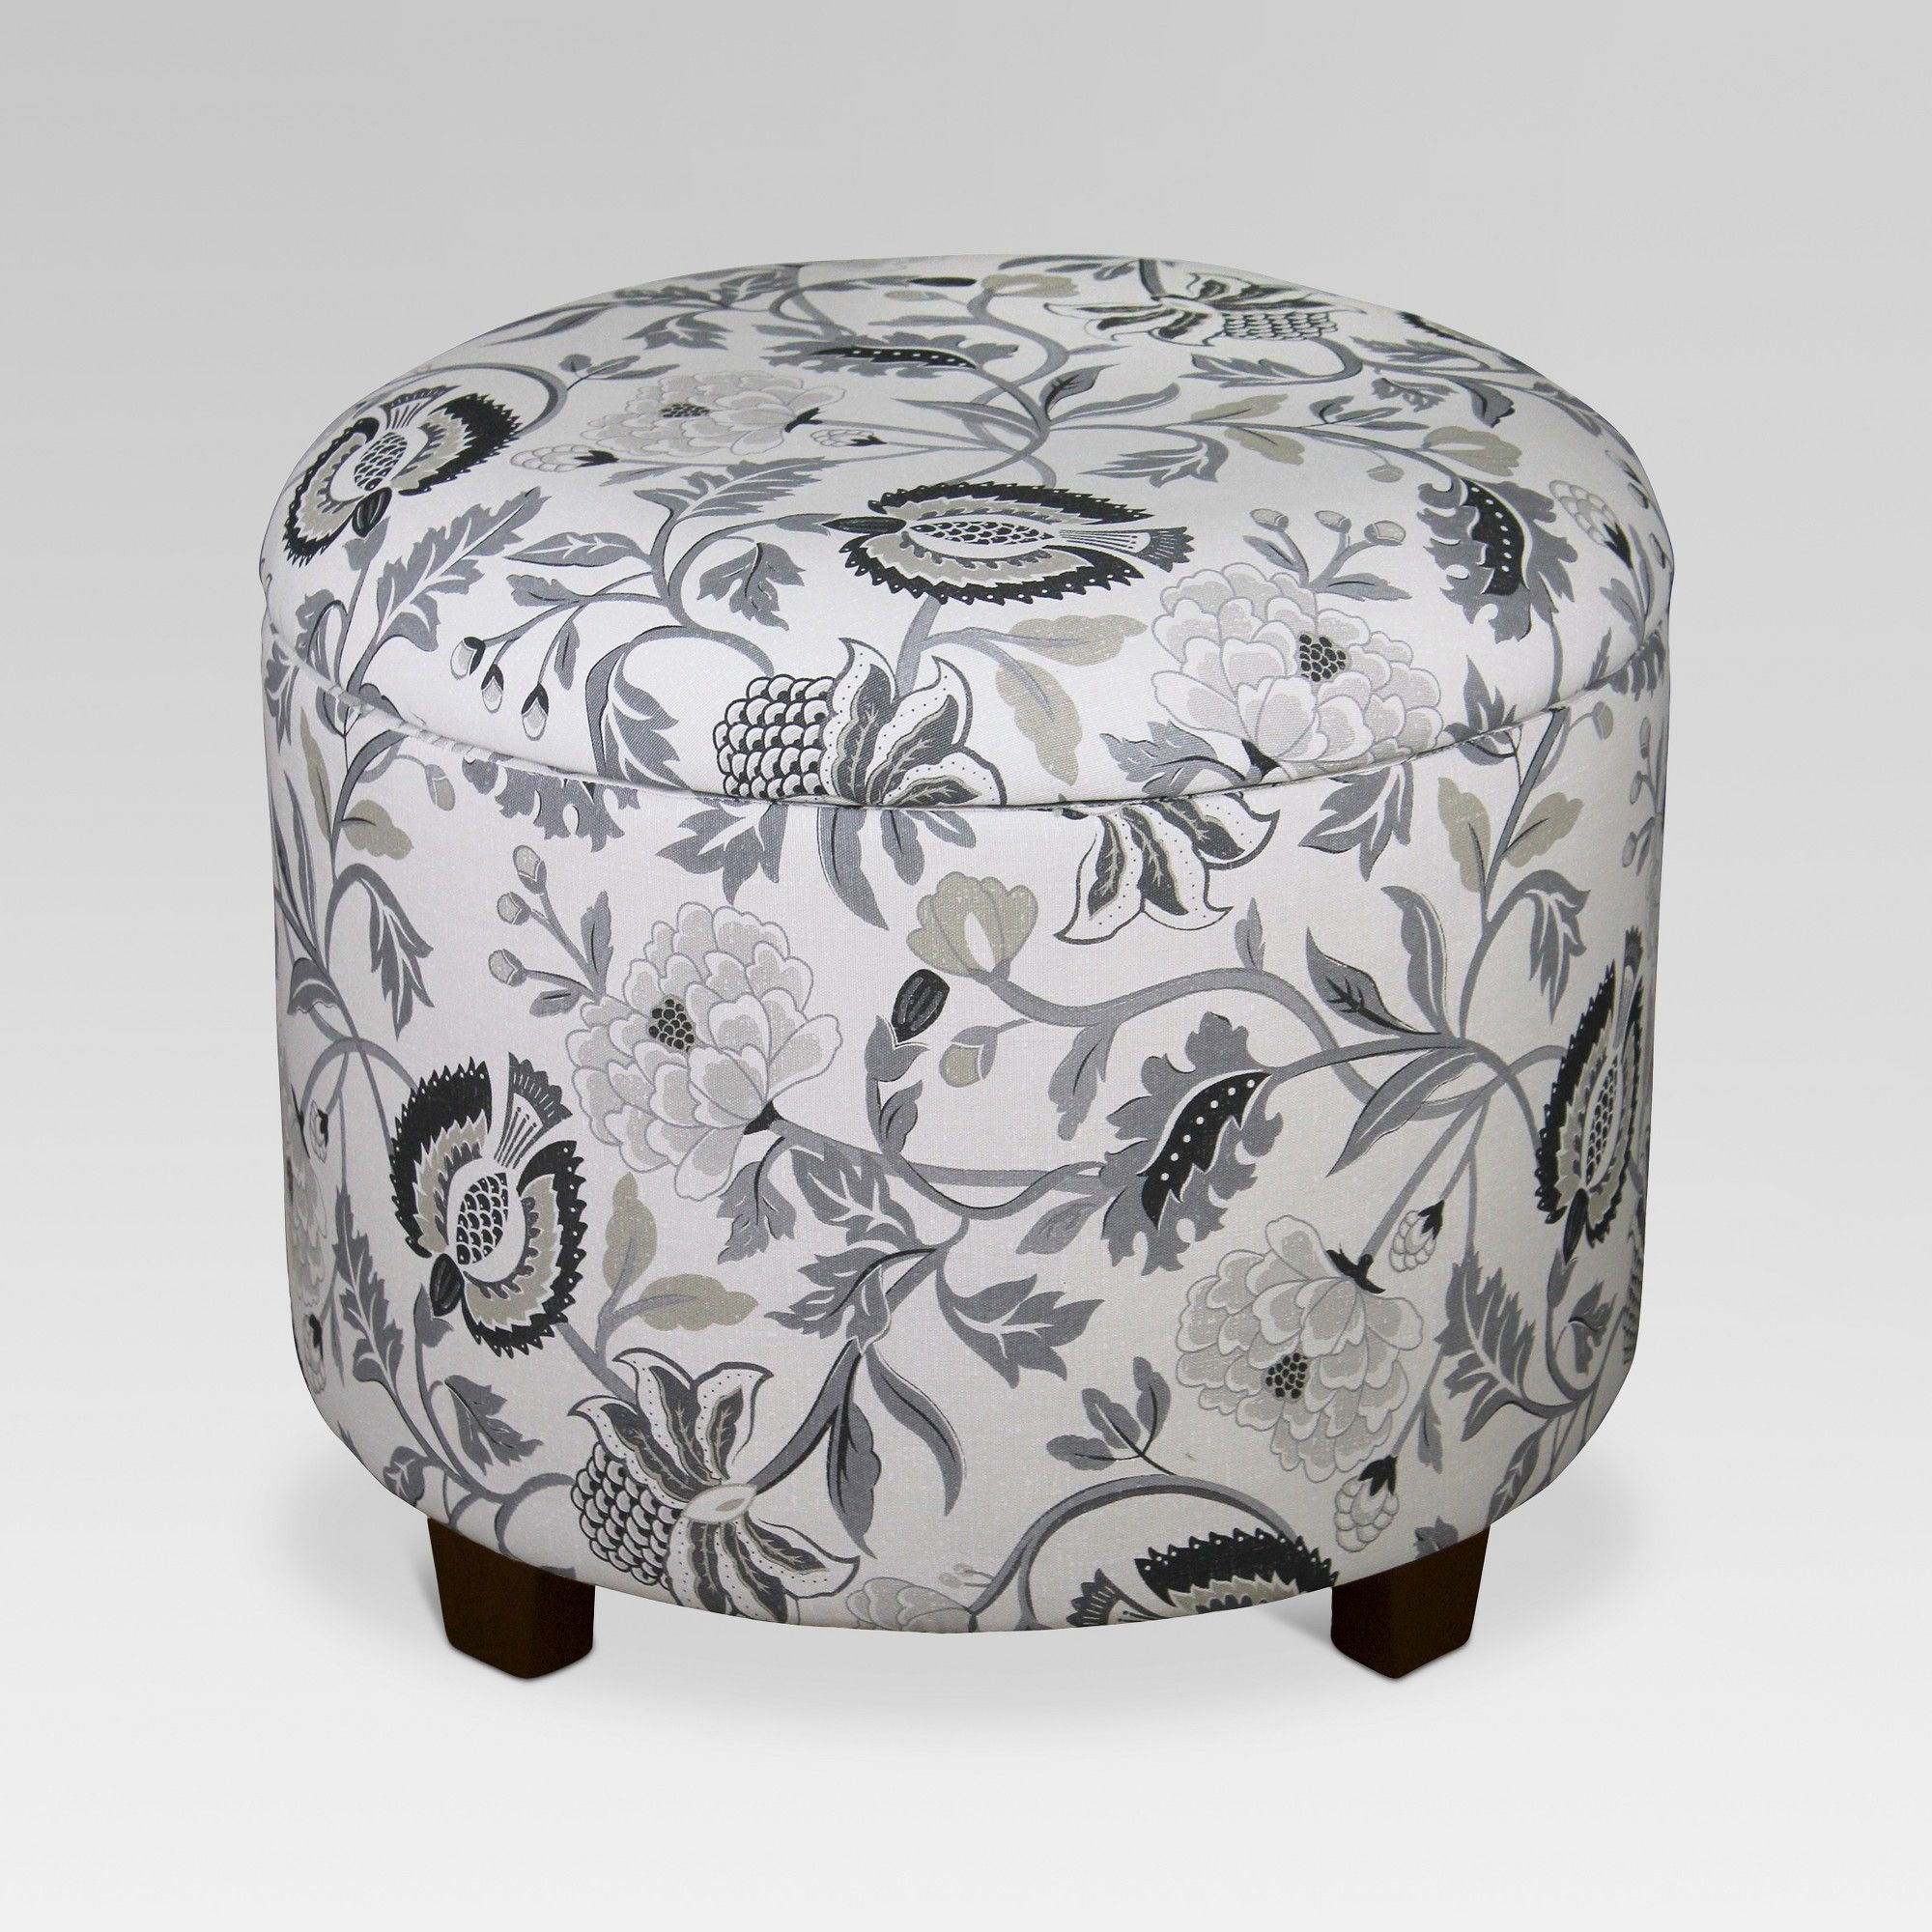 Smoke Gray  Round Ottomans For Current Trappe Medium Round Ottoman With Storage – Gray Floral – Threshold (View 10 of 10)